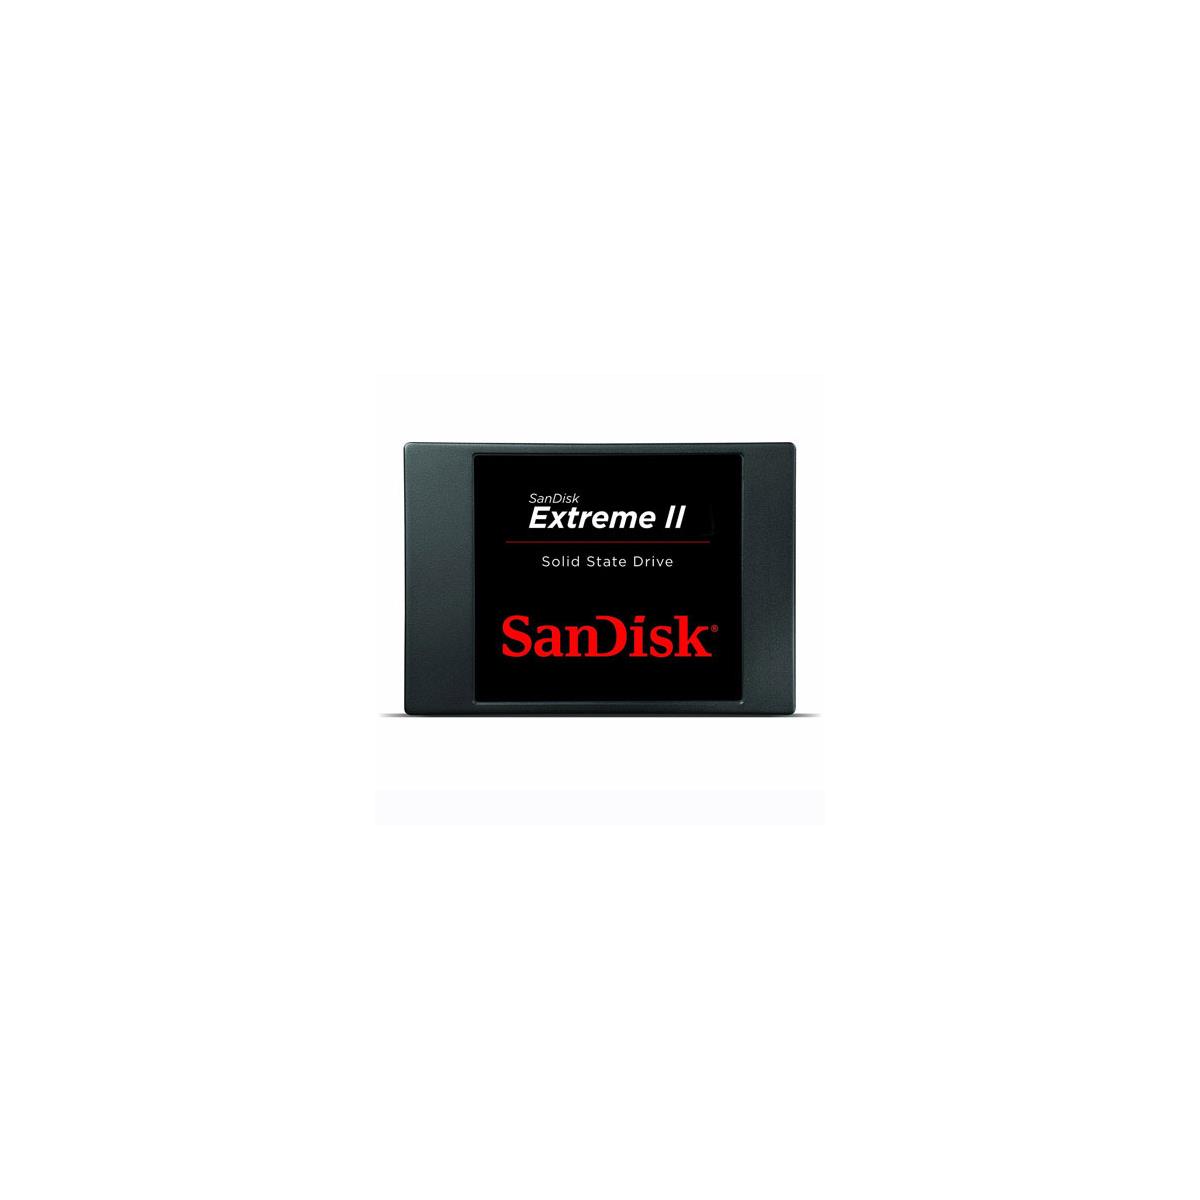 Image of SanDisk Extreme II 120GB Solid State Drive (SSD)